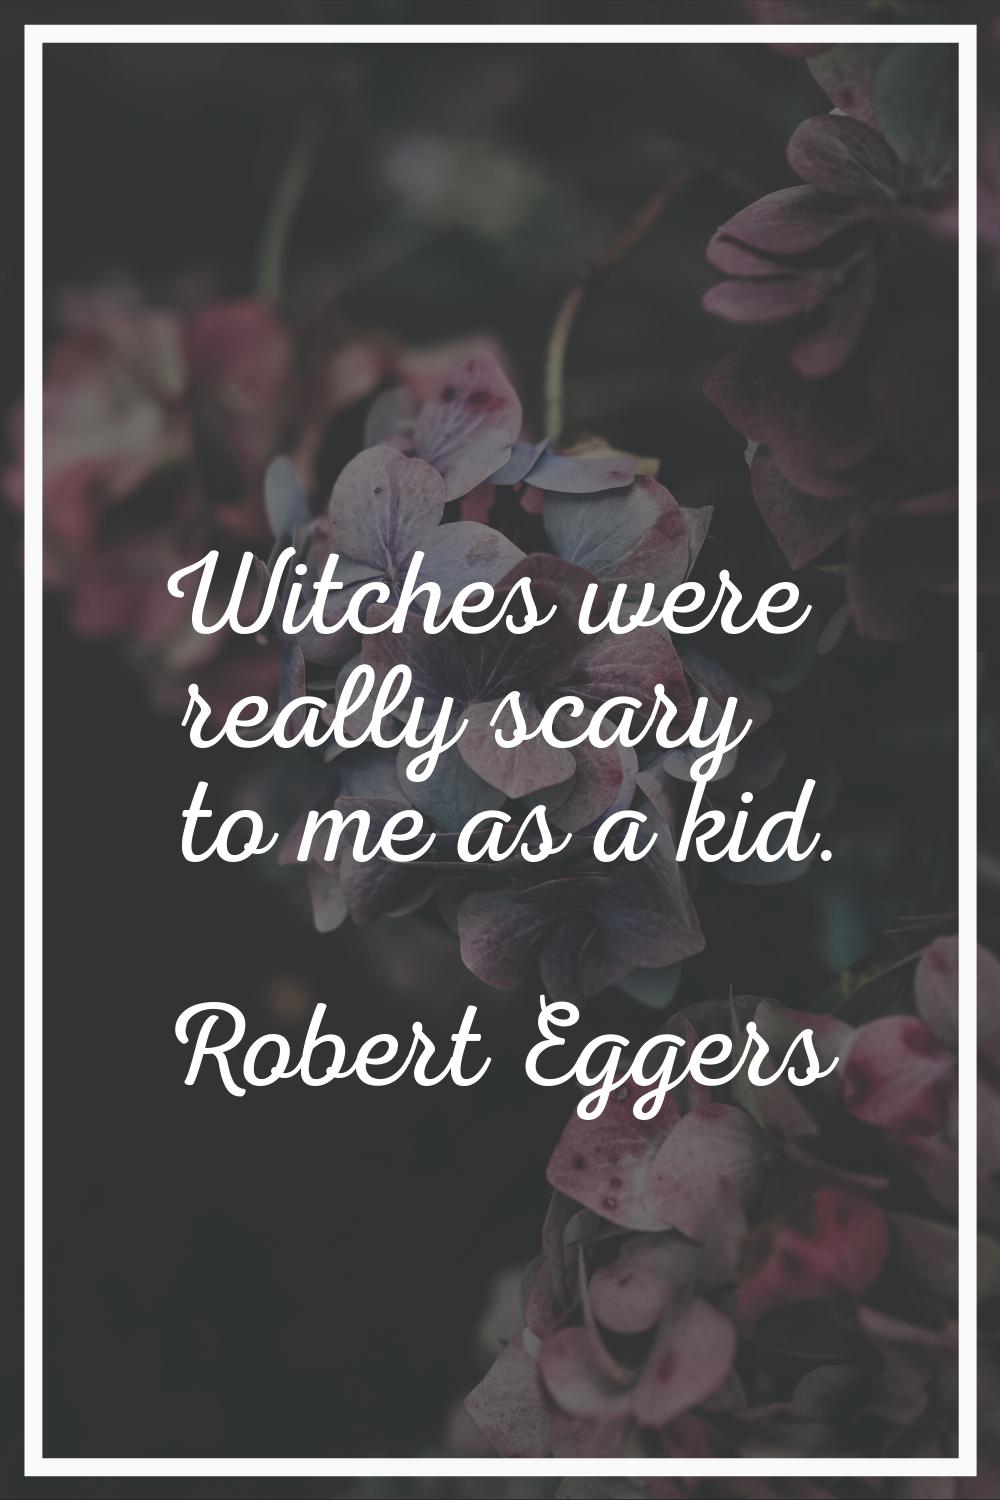 Witches were really scary to me as a kid.